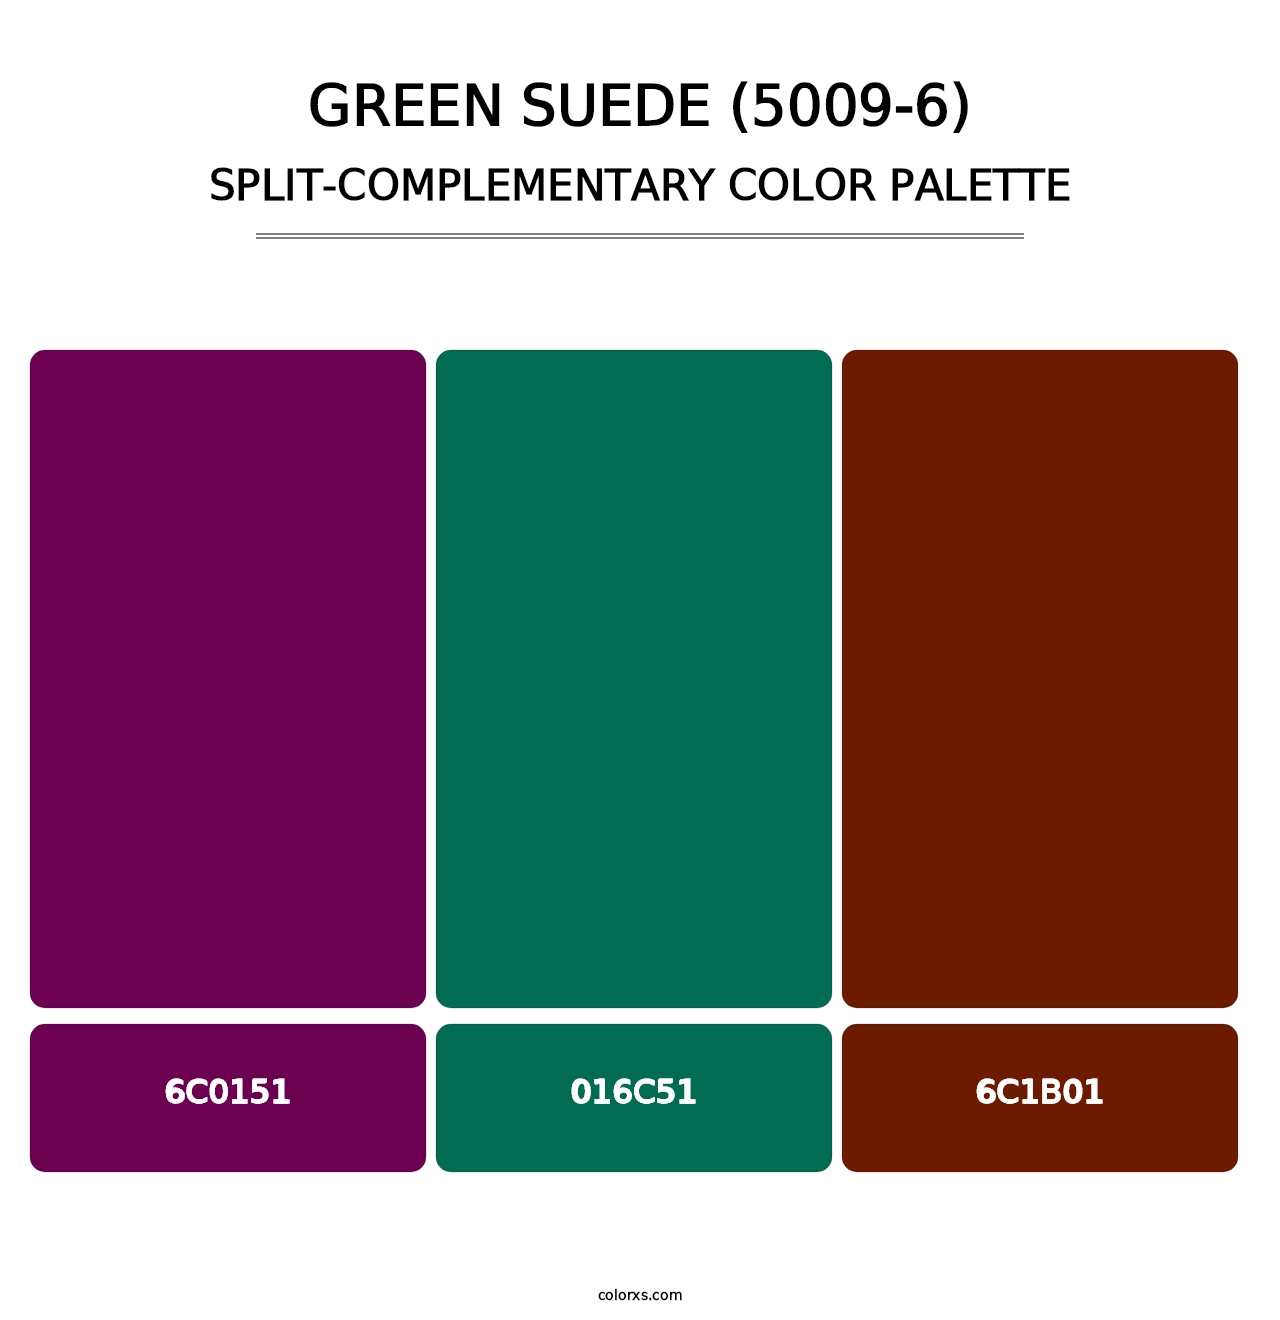 Green Suede (5009-6) - Split-Complementary Color Palette